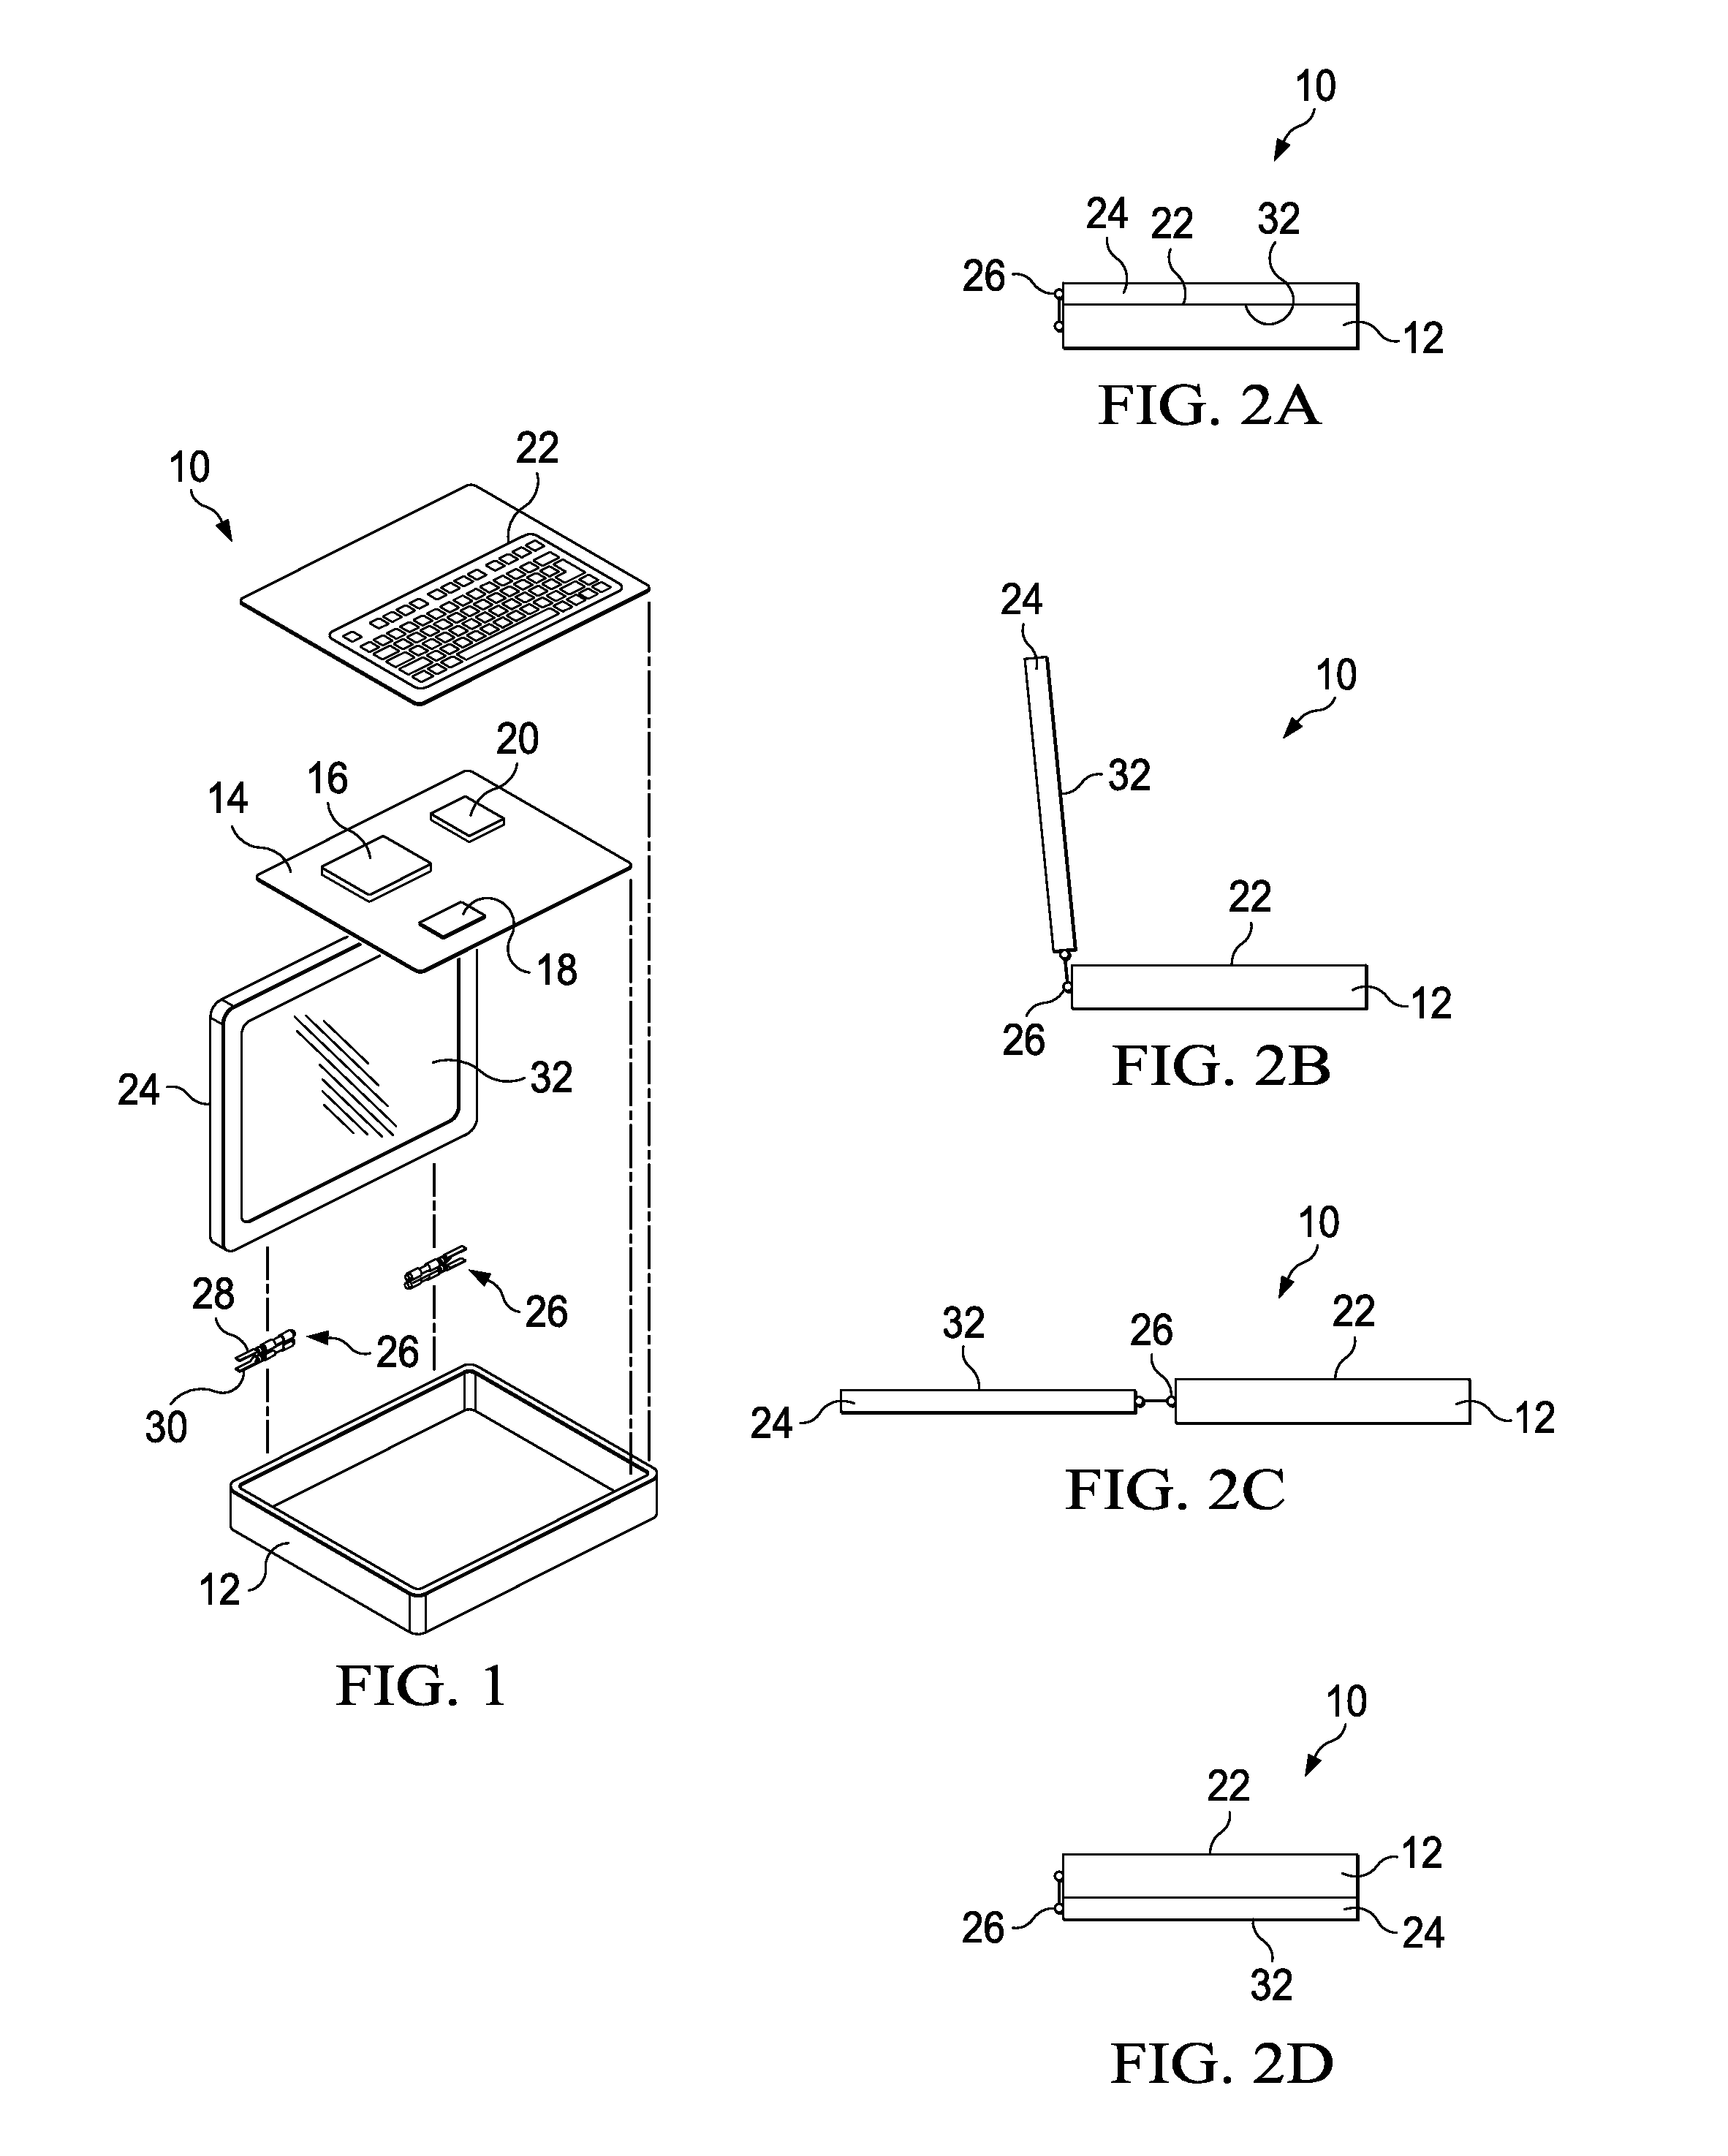 Information handling system housing lid with synchronized motion provided by a flexible compressive member